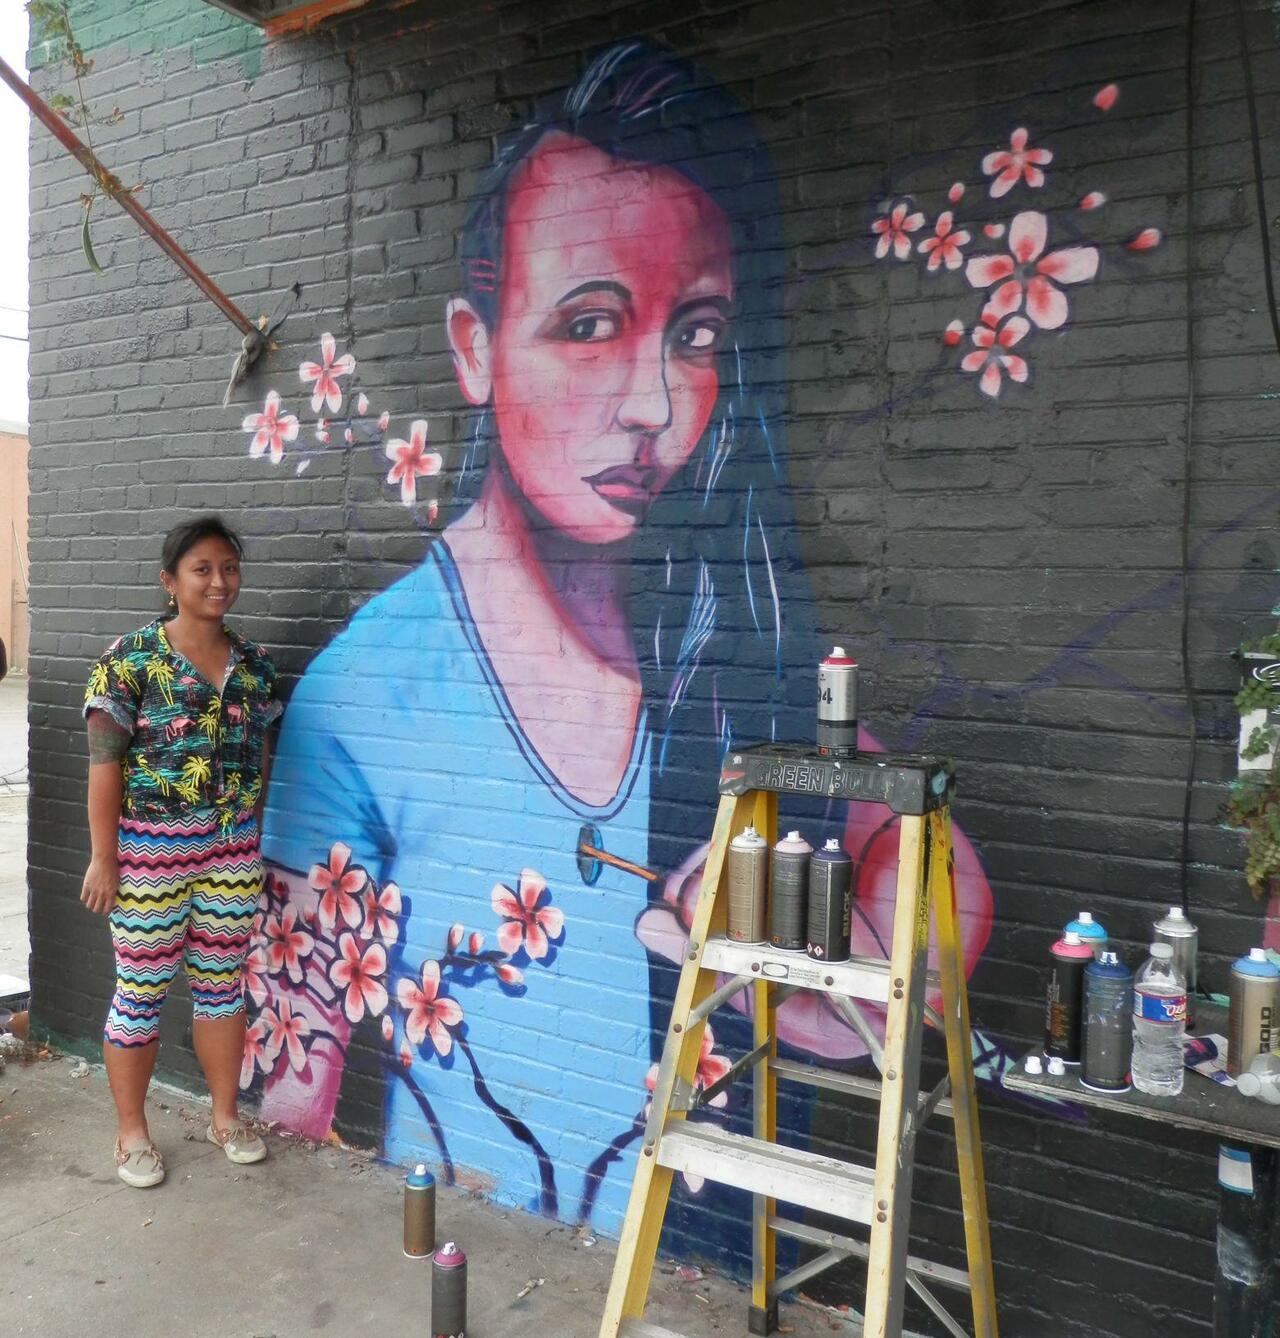 #Houston #Graffiti #Streetart Royal (Houston) working on her art at Super Happy Funland for Meeting of Styles 2015. http://t.co/aN2YIs1eTk